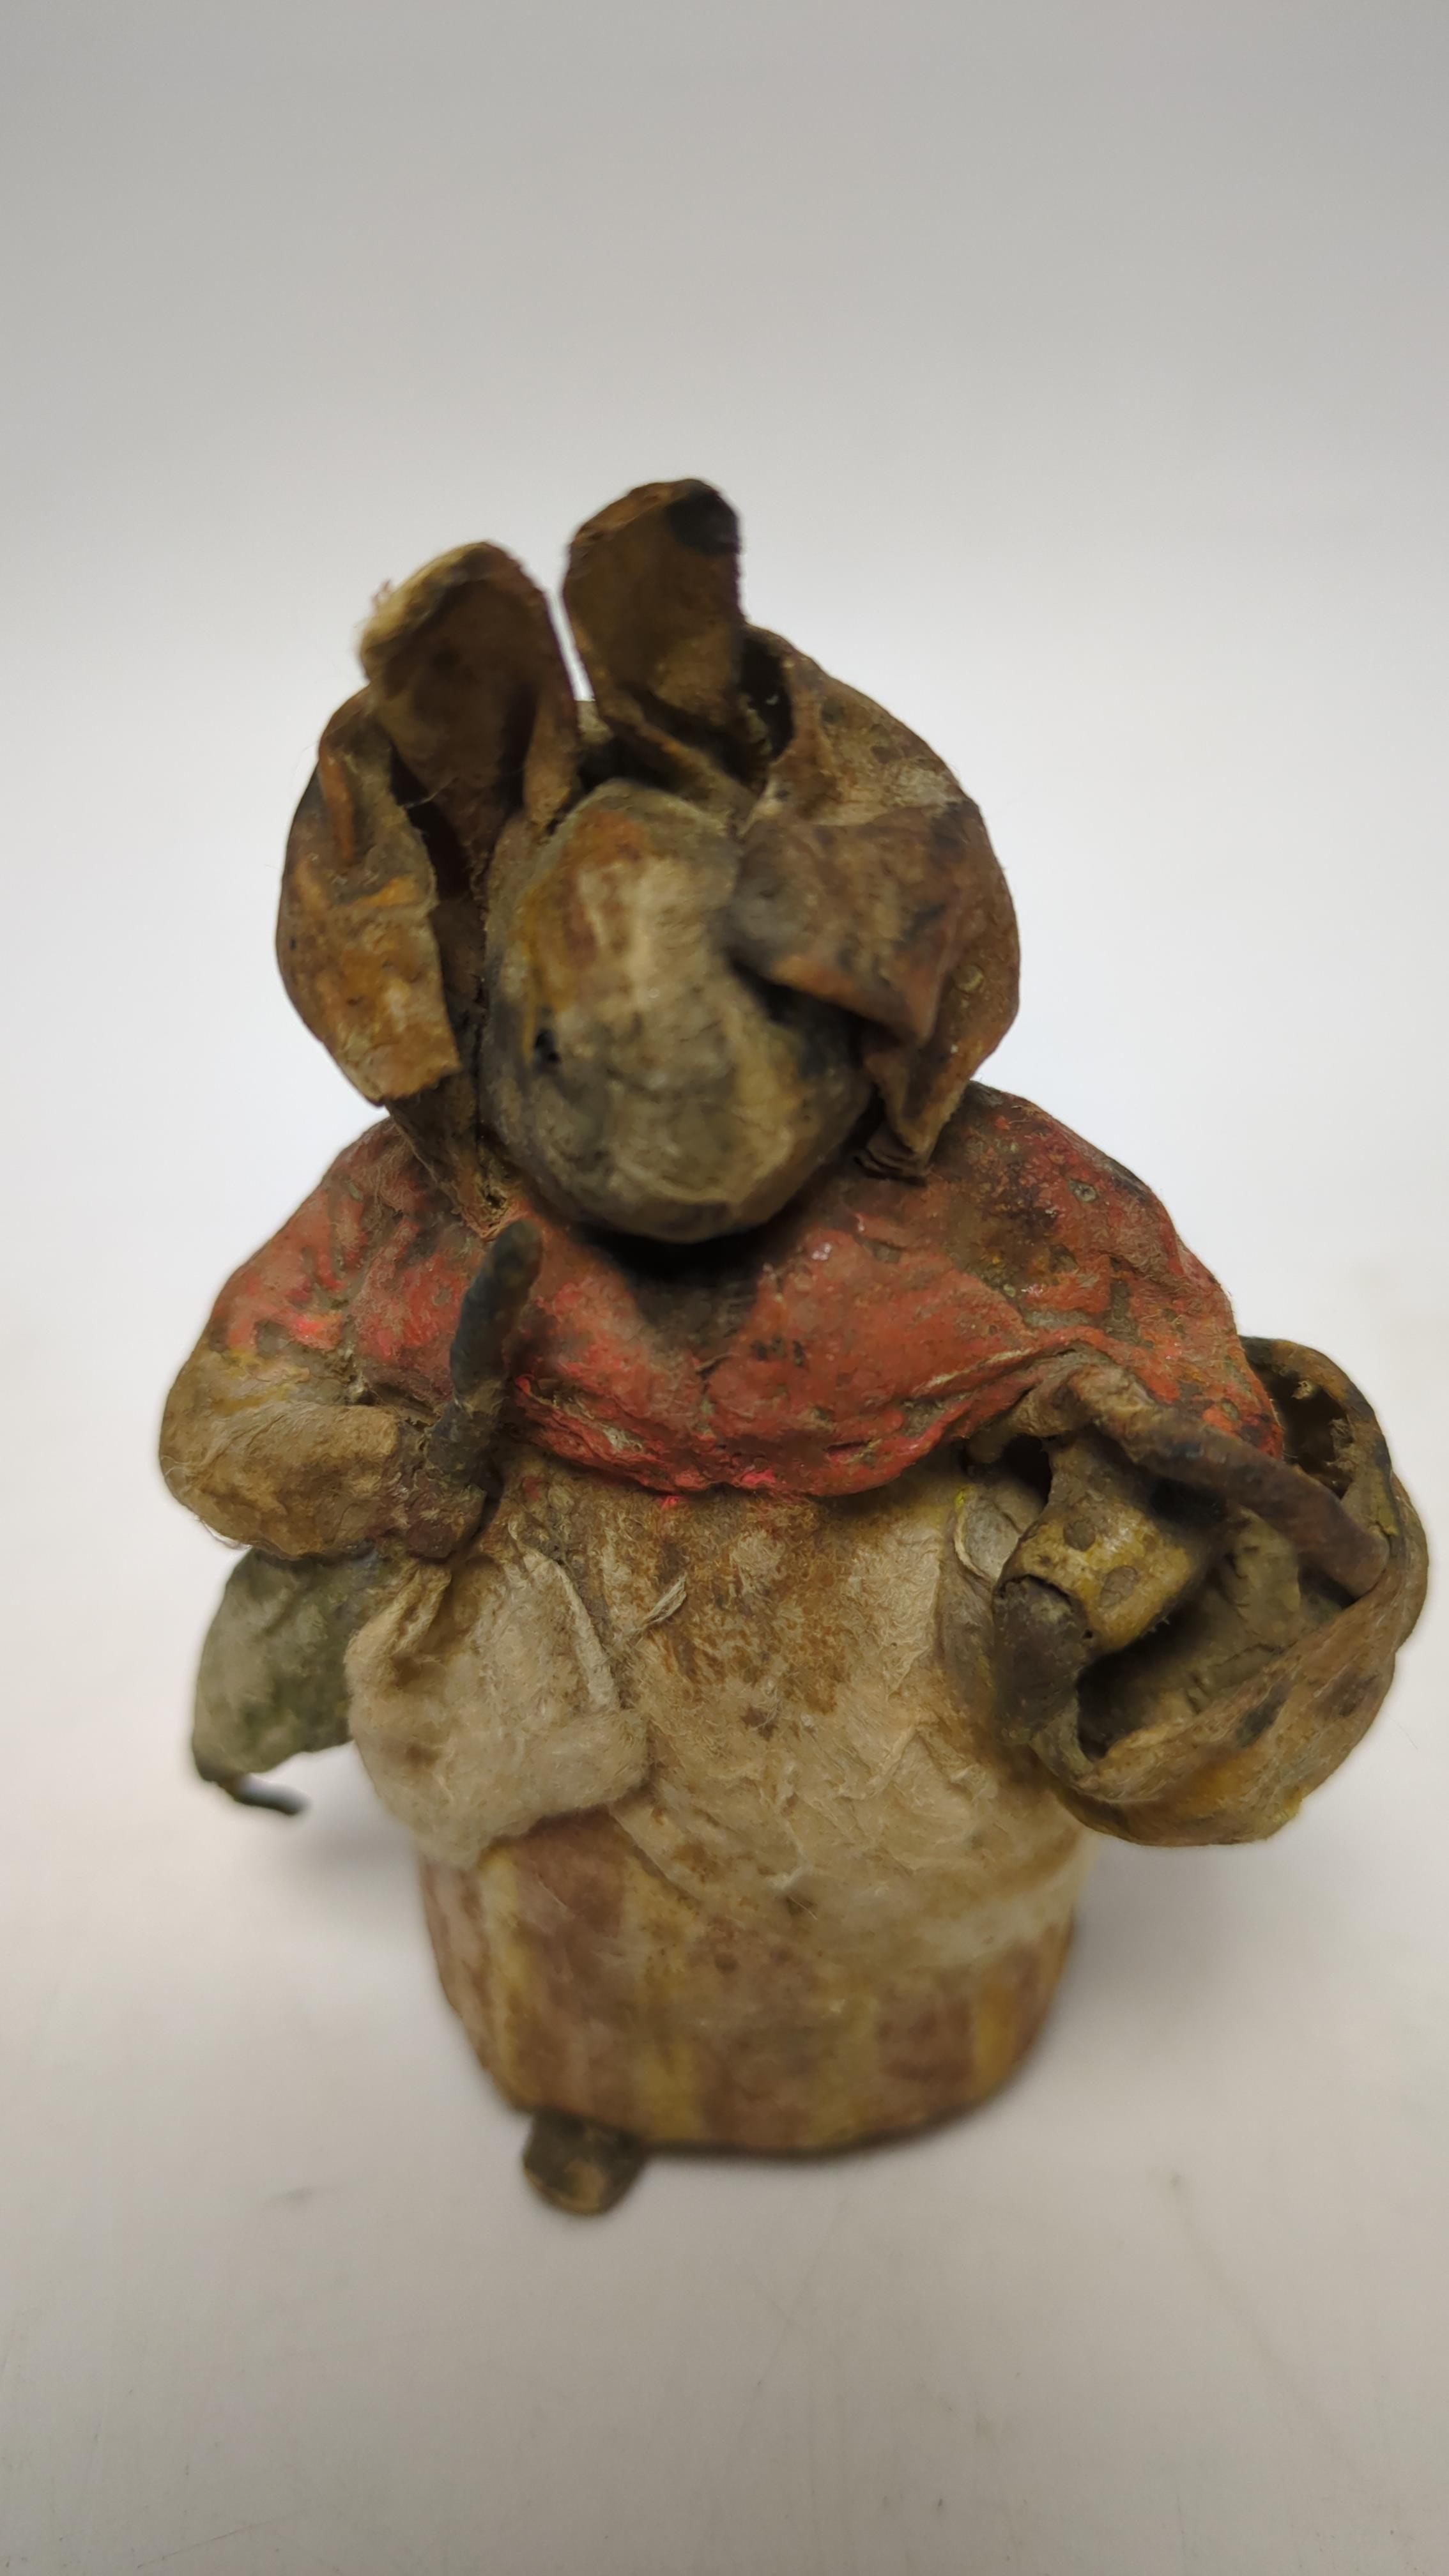 An F. Warne papier-mâché Beatrix Potter figure of Mrs. Rabbit with basket and umbrella, red and white F. Warne & Co. paper label to the base, dating it to pre-1917, 8.5cm high